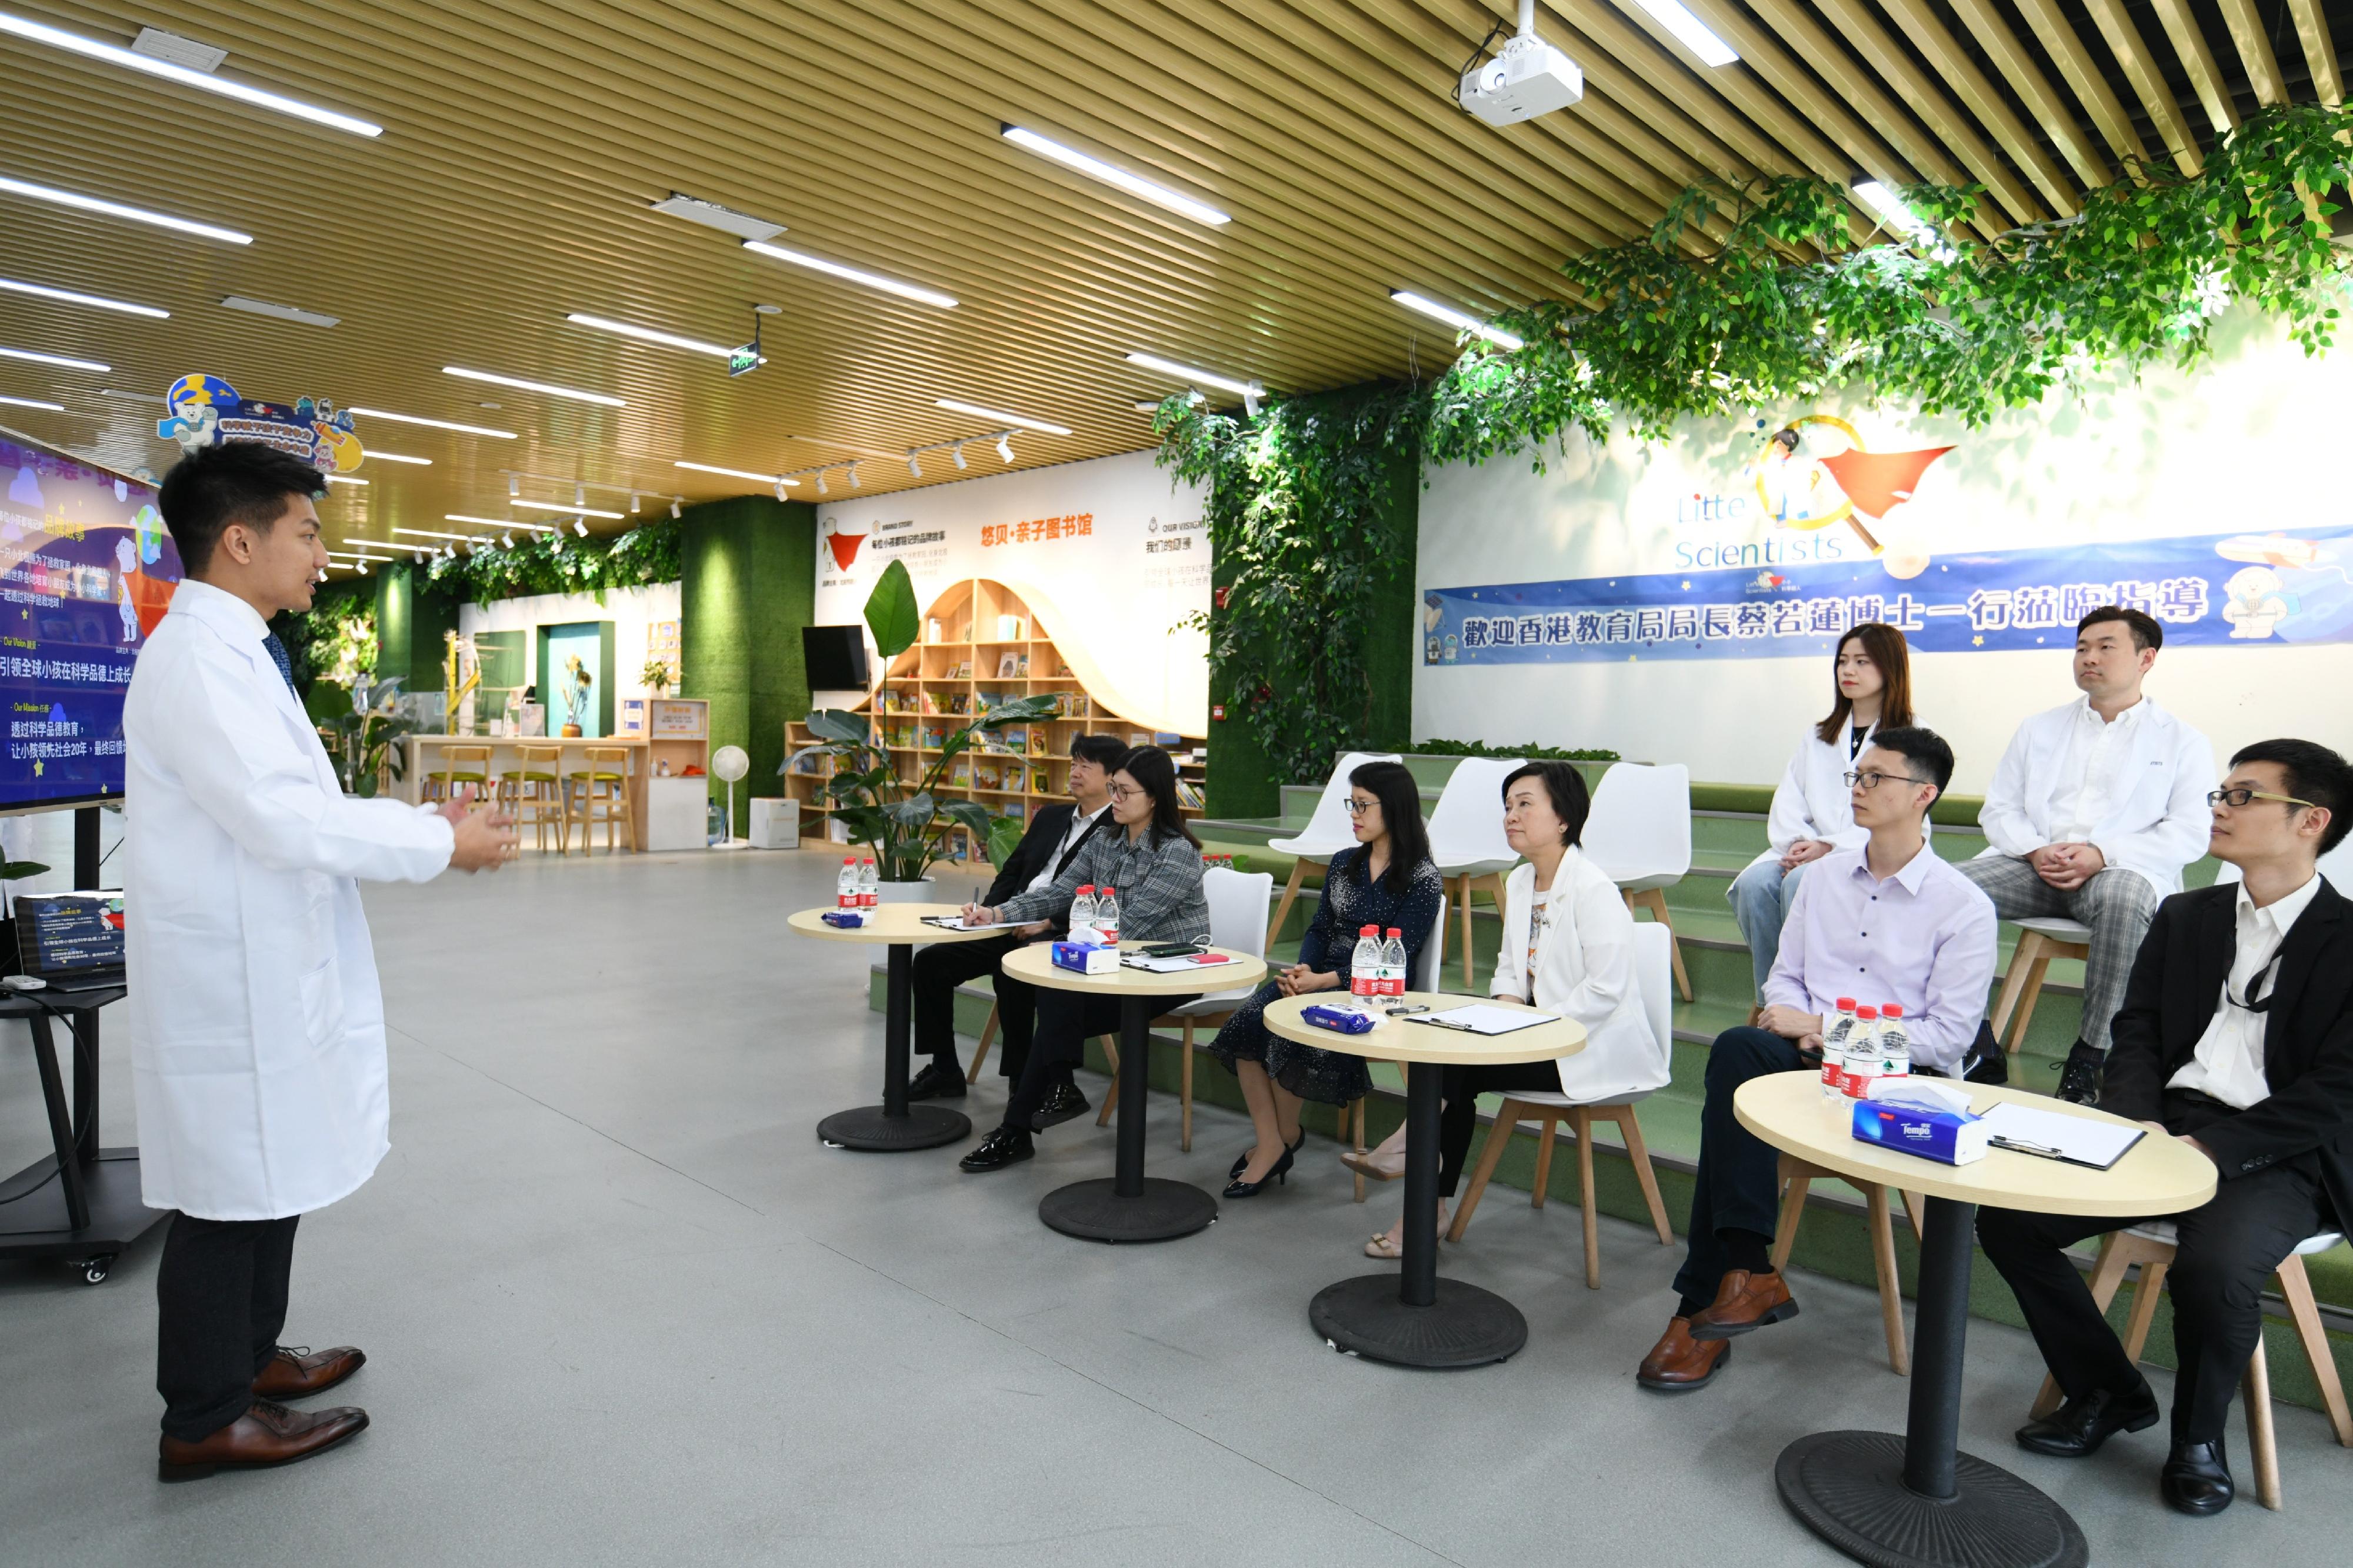 The Secretary for Education, Dr Choi Yuk-lin (fifth right), visits Little Scientists, a Hong Kong education enterprise, in Chengdu yesterday (April 26) to learn about its philosophy and practical experience in promoting STEAM (Science, Technology, Engineering, Arts and Mathematics) education for young children.